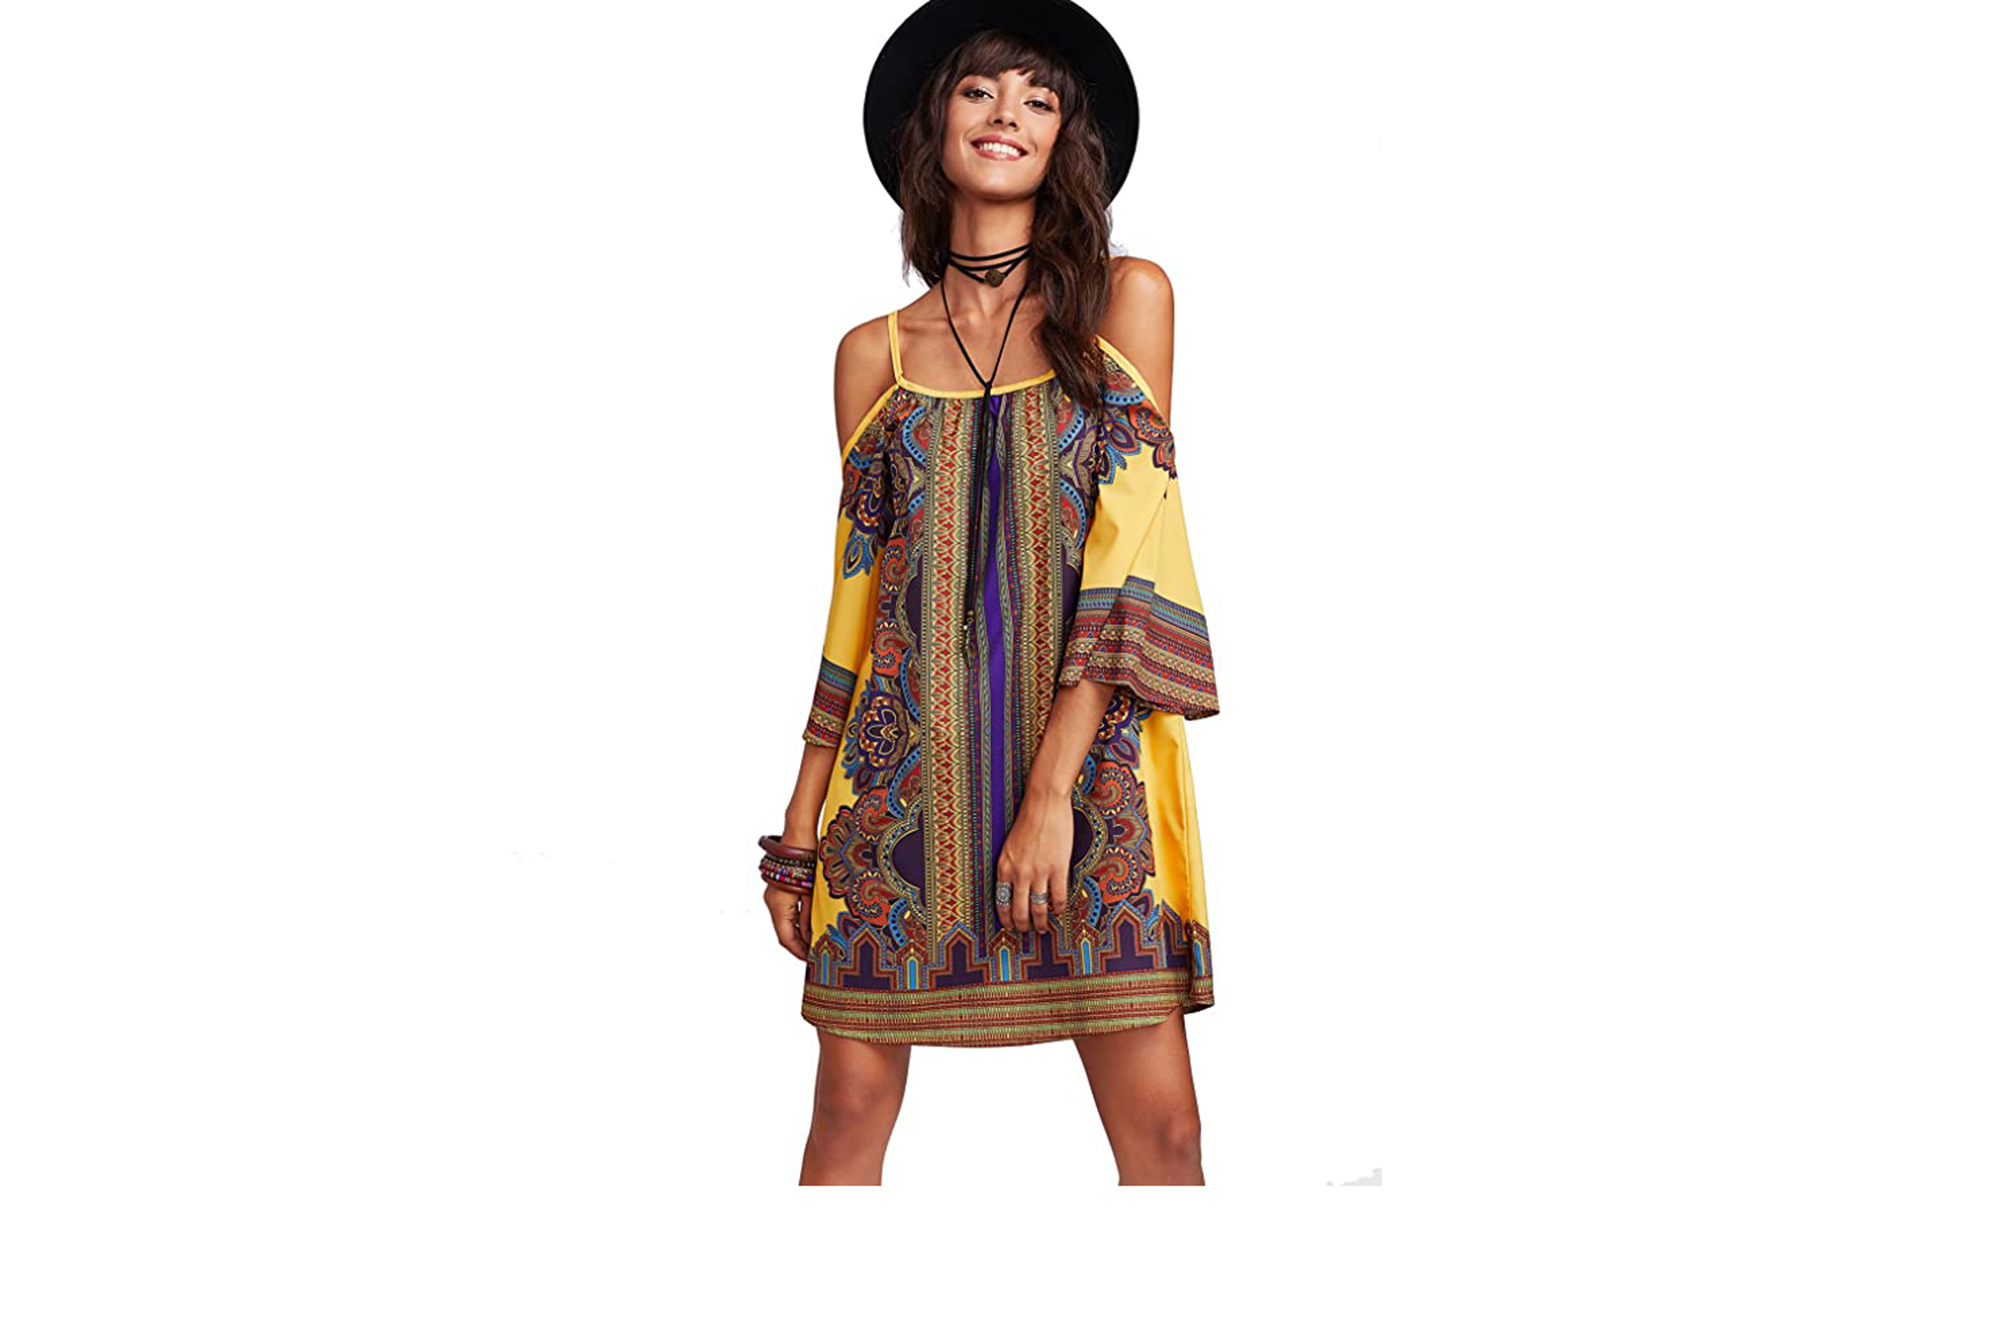 Stand Out in the Summer Heat With This Vibrant Shift Dress